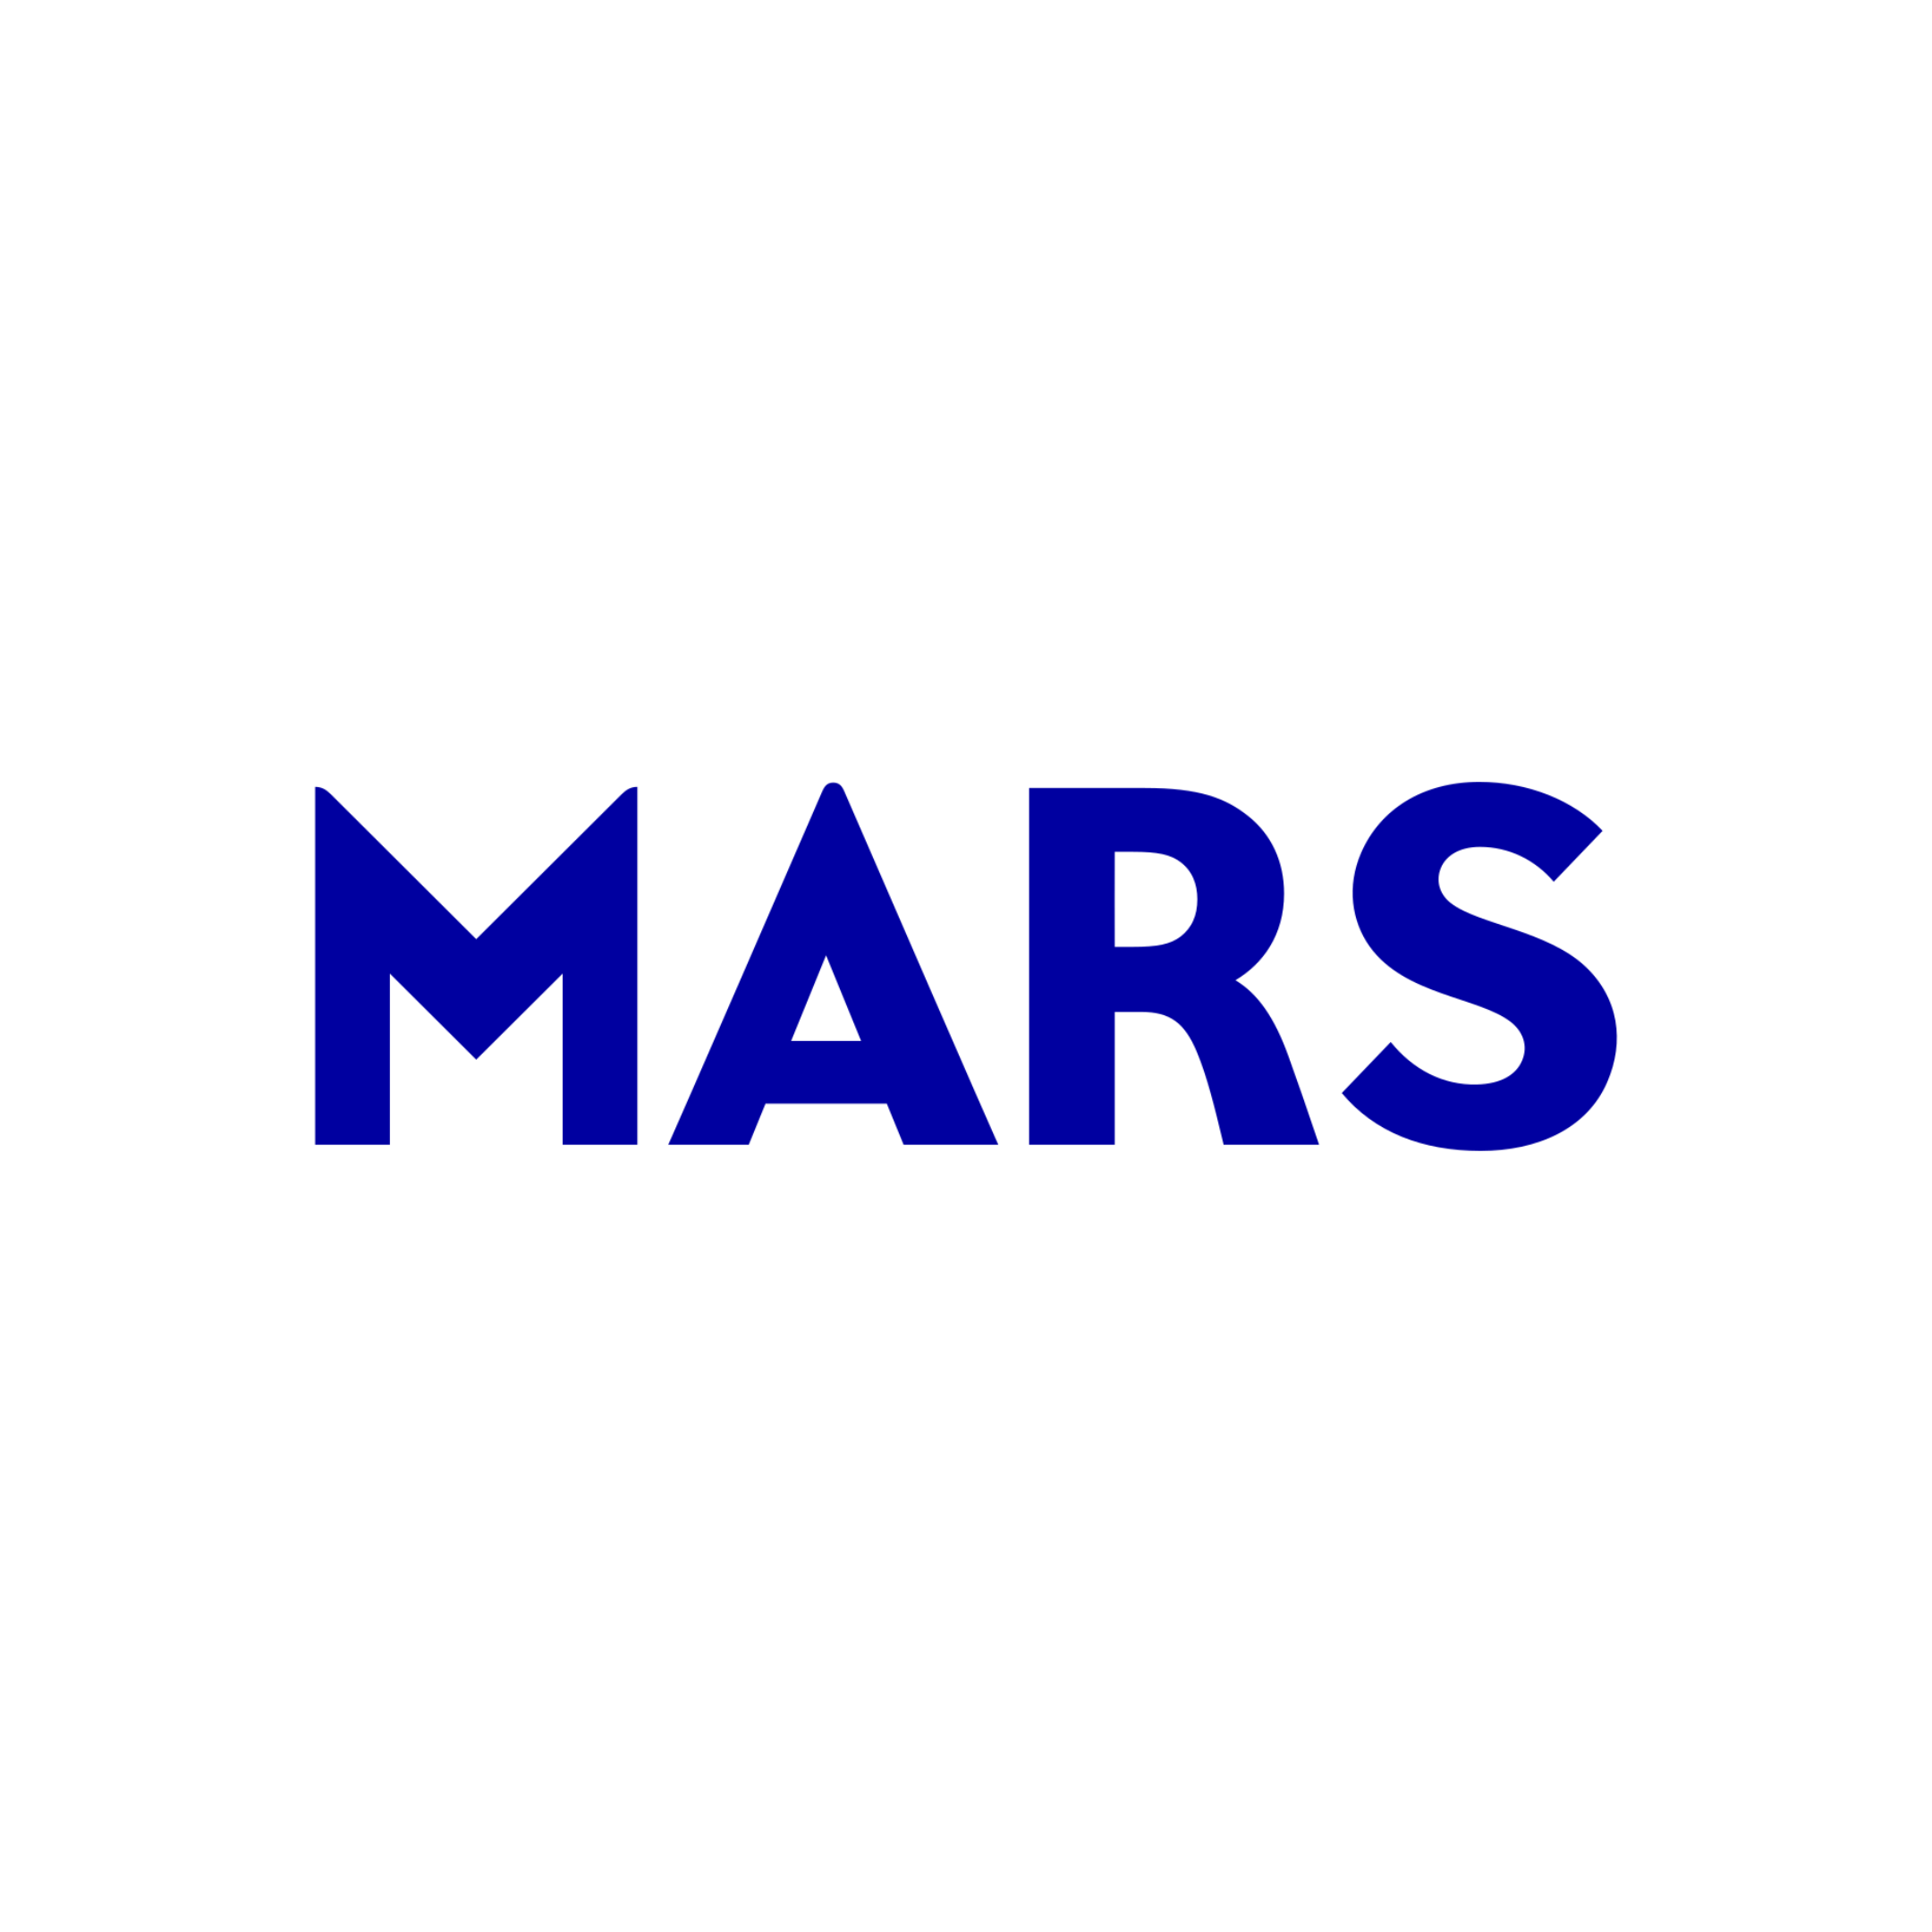 Tessier-employment-icons-Mars.png